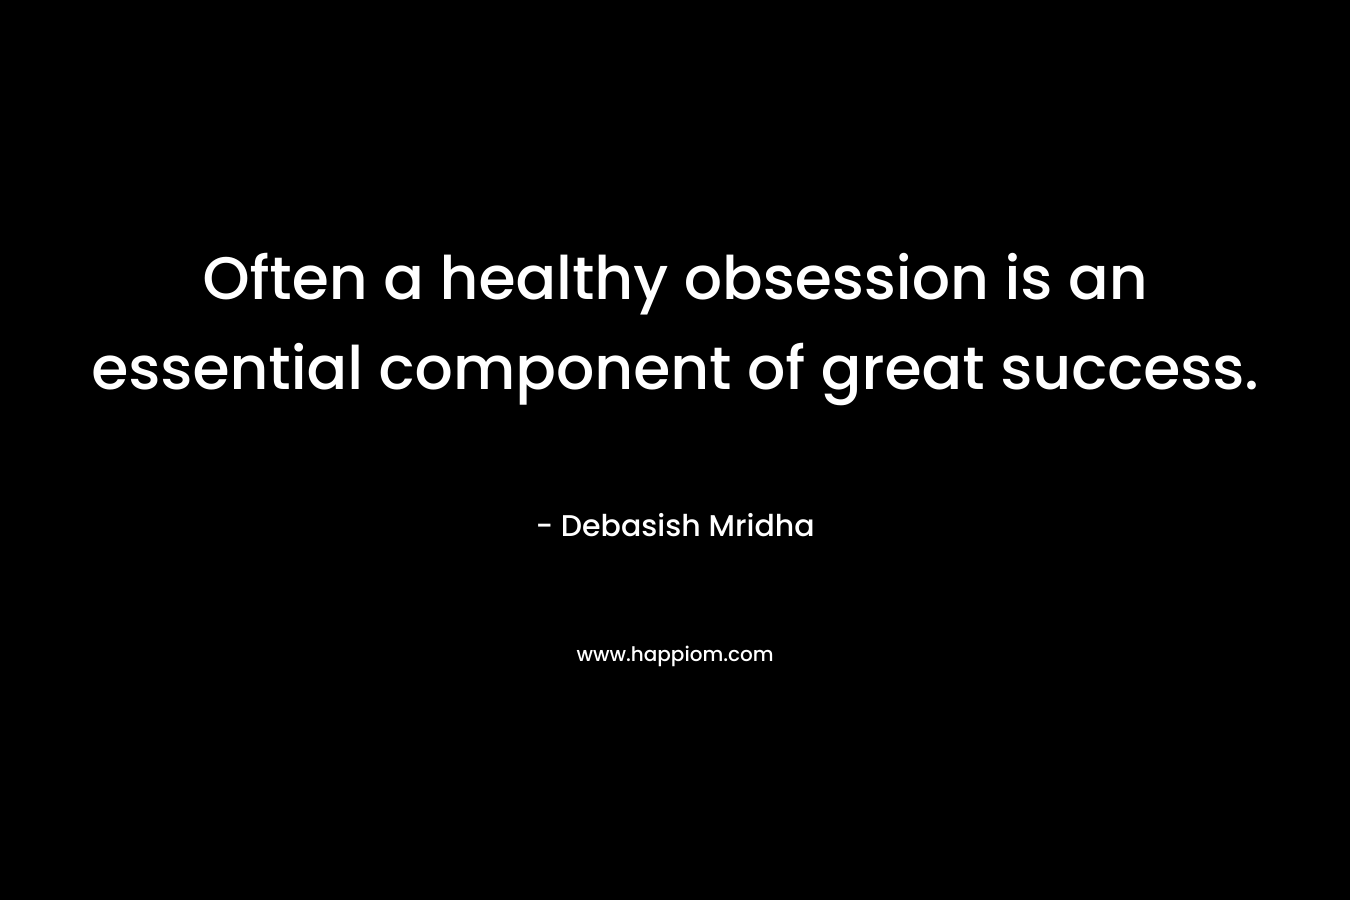 Often a healthy obsession is an essential component of great success. – Debasish Mridha